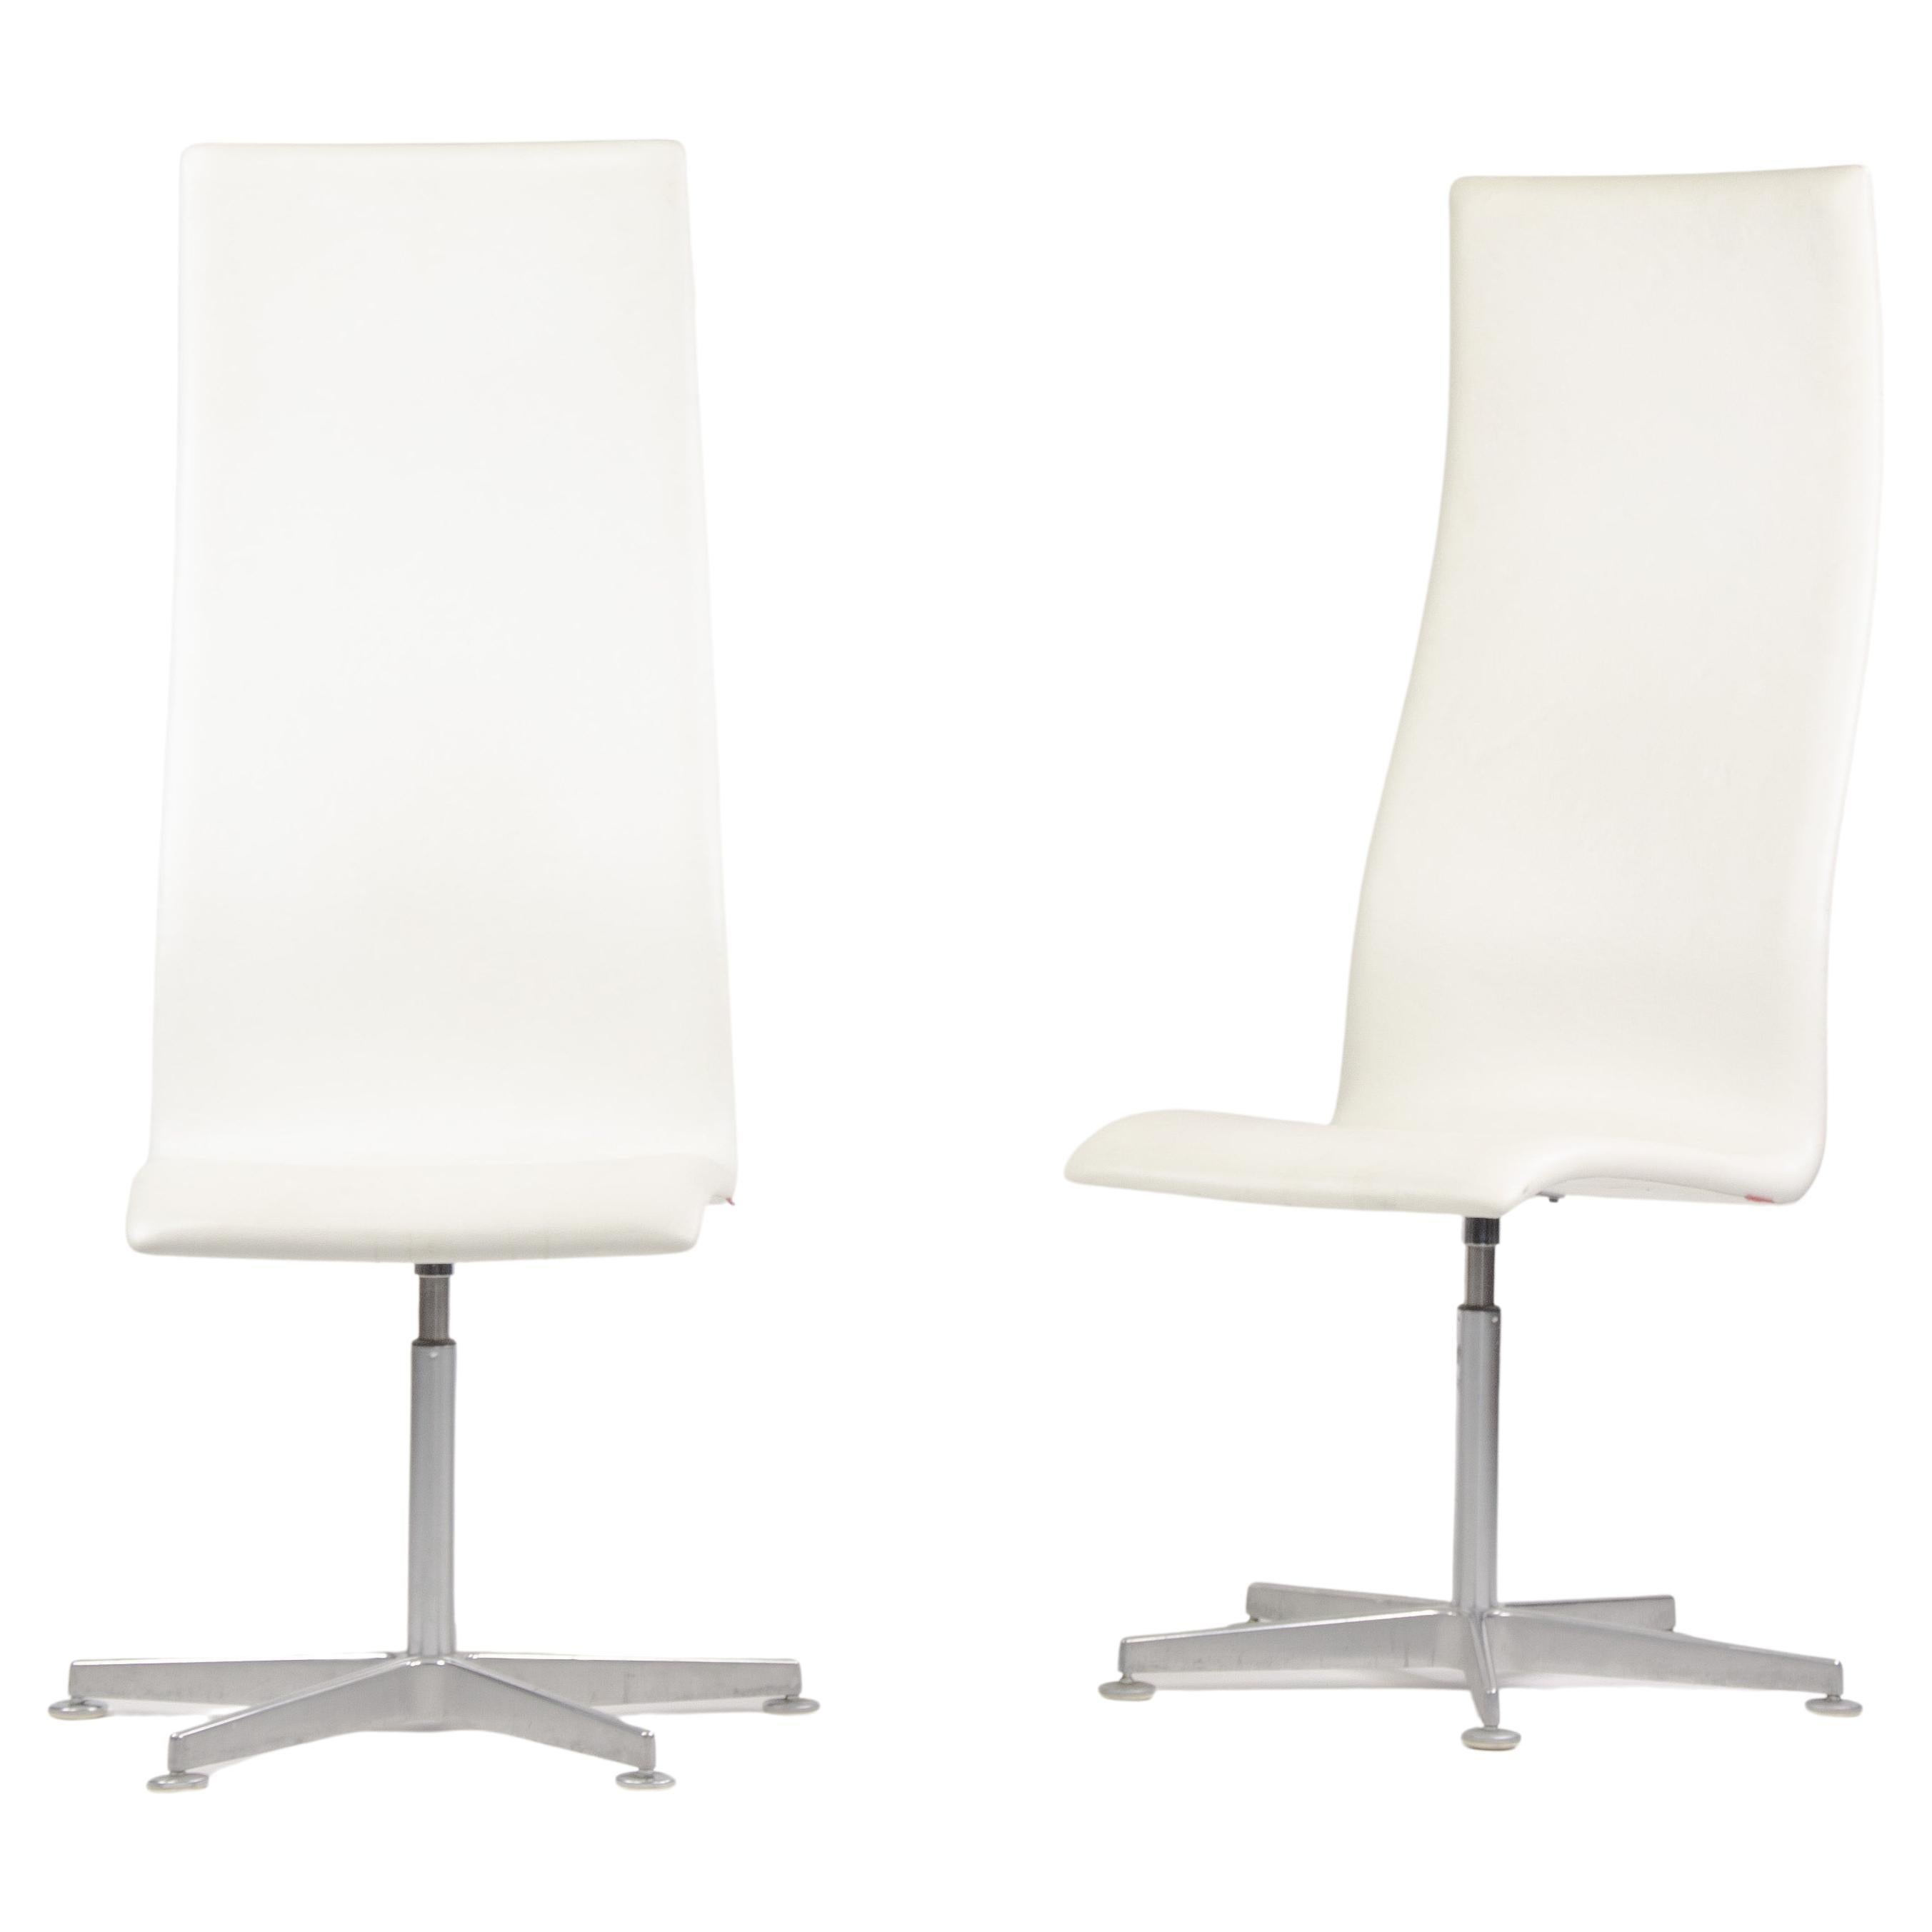 Fritz Hansen Arne Jacobsen Tall Oxford Chair White Leather 2007 4x Available For Sale